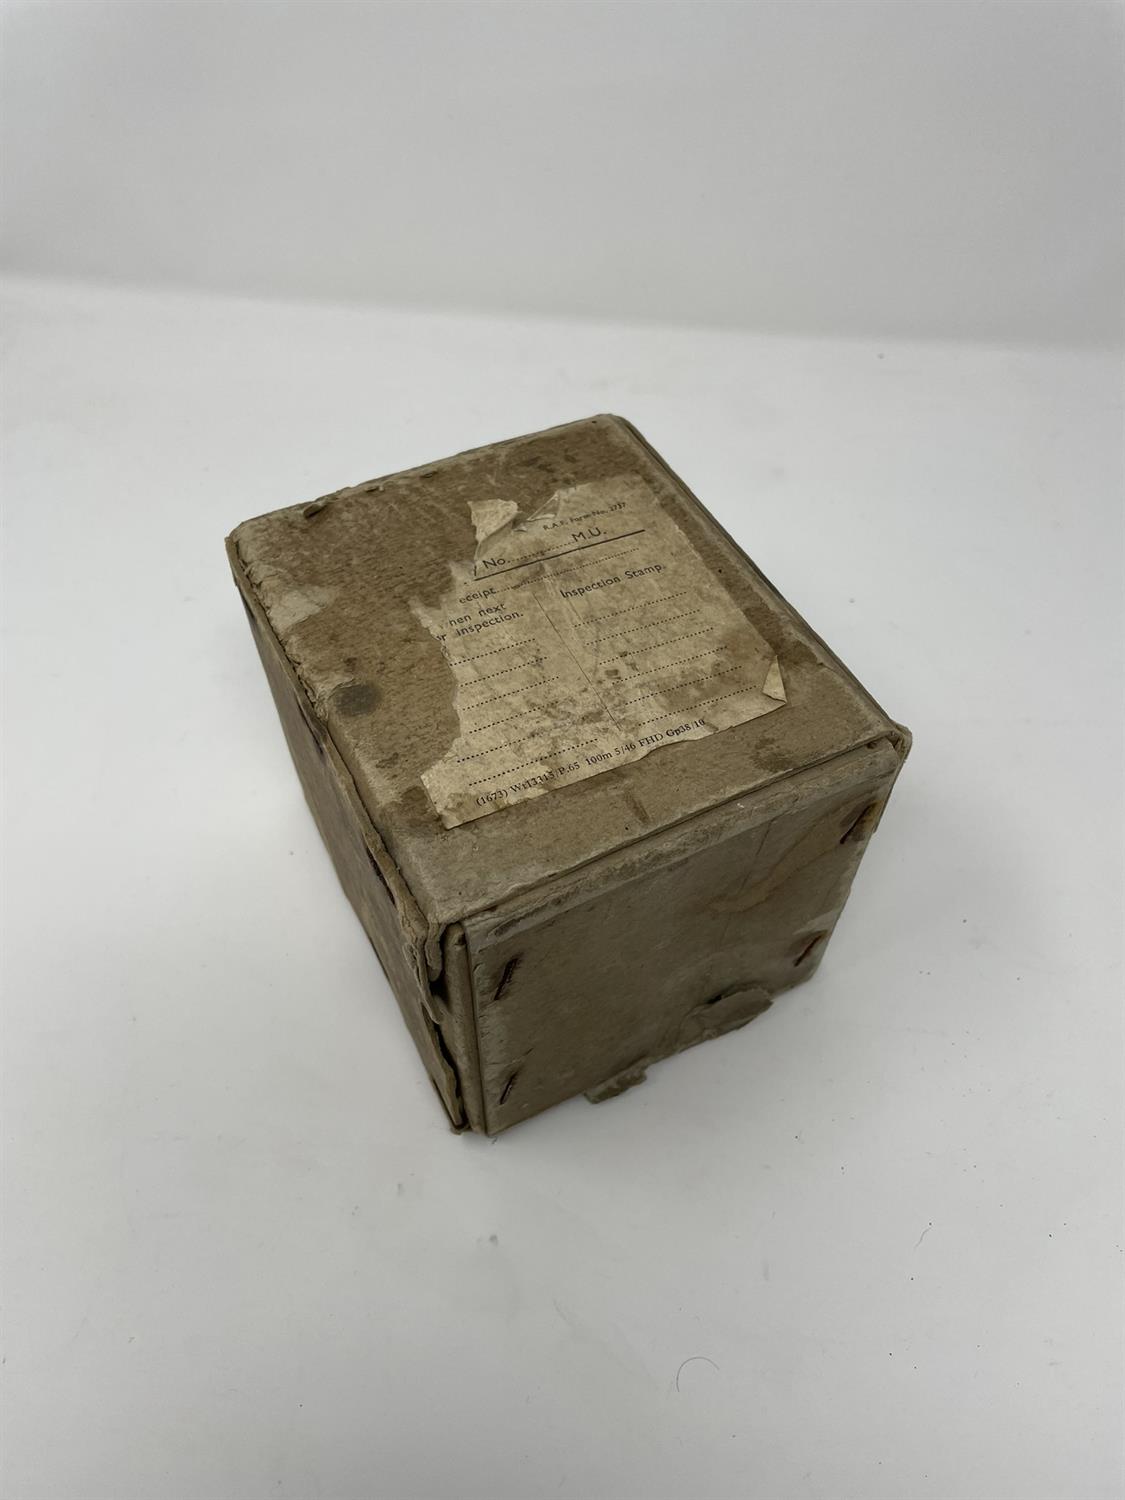 Airspeed Indicator in Knots with Period-Correct Box Dated 1944* - Image 8 of 10